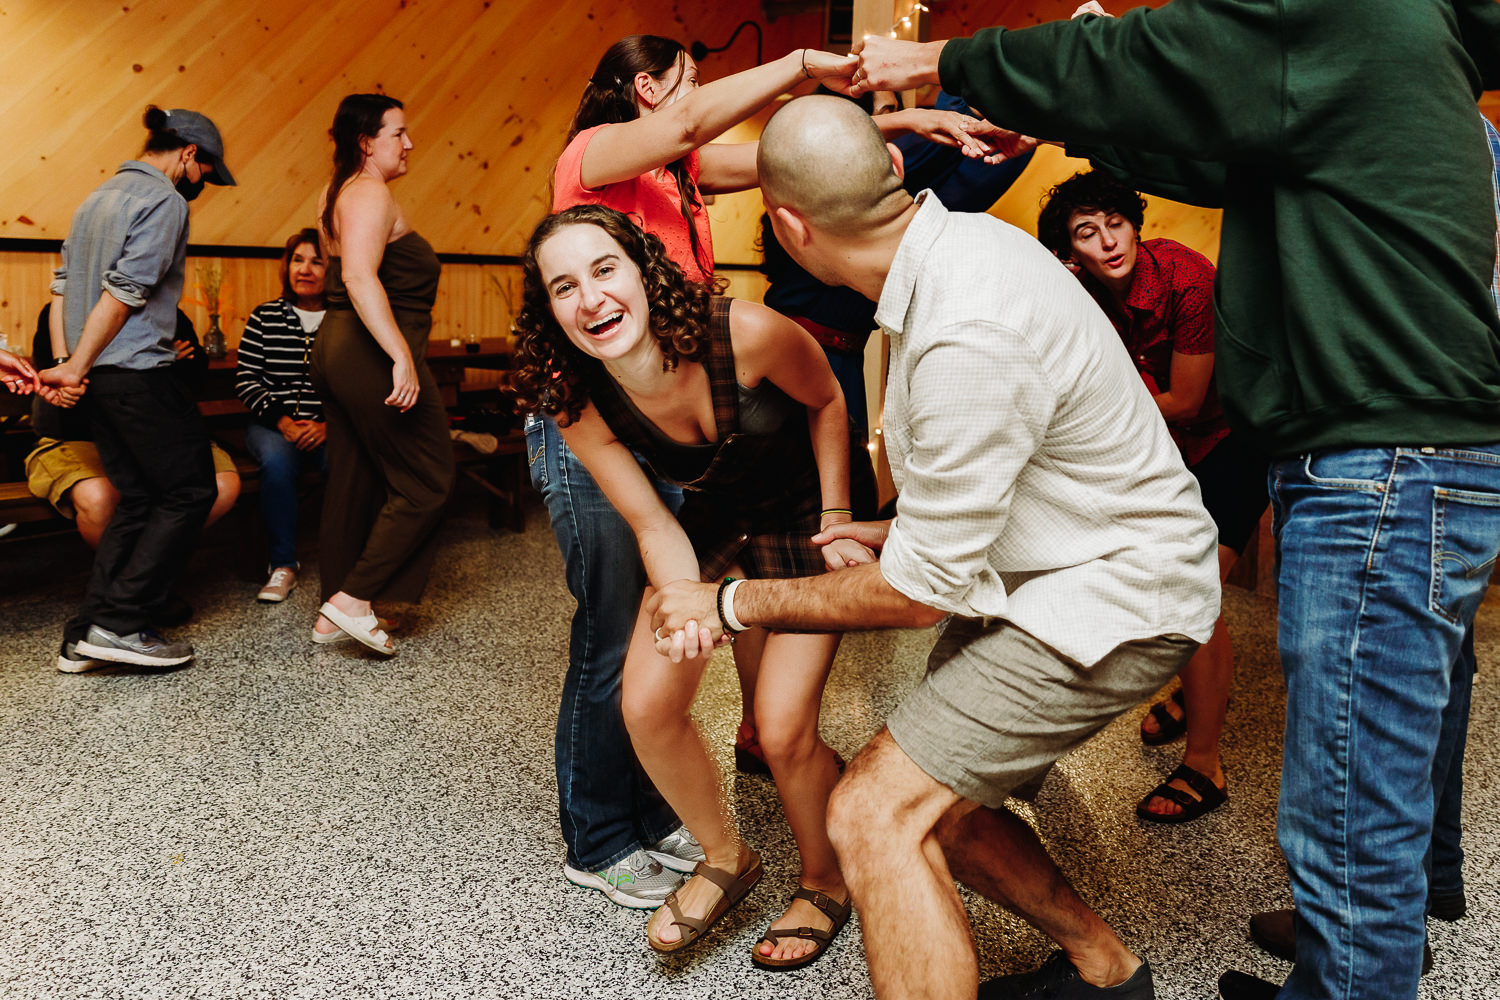 engaged couple contra dancing at their Maine wedding welcome party